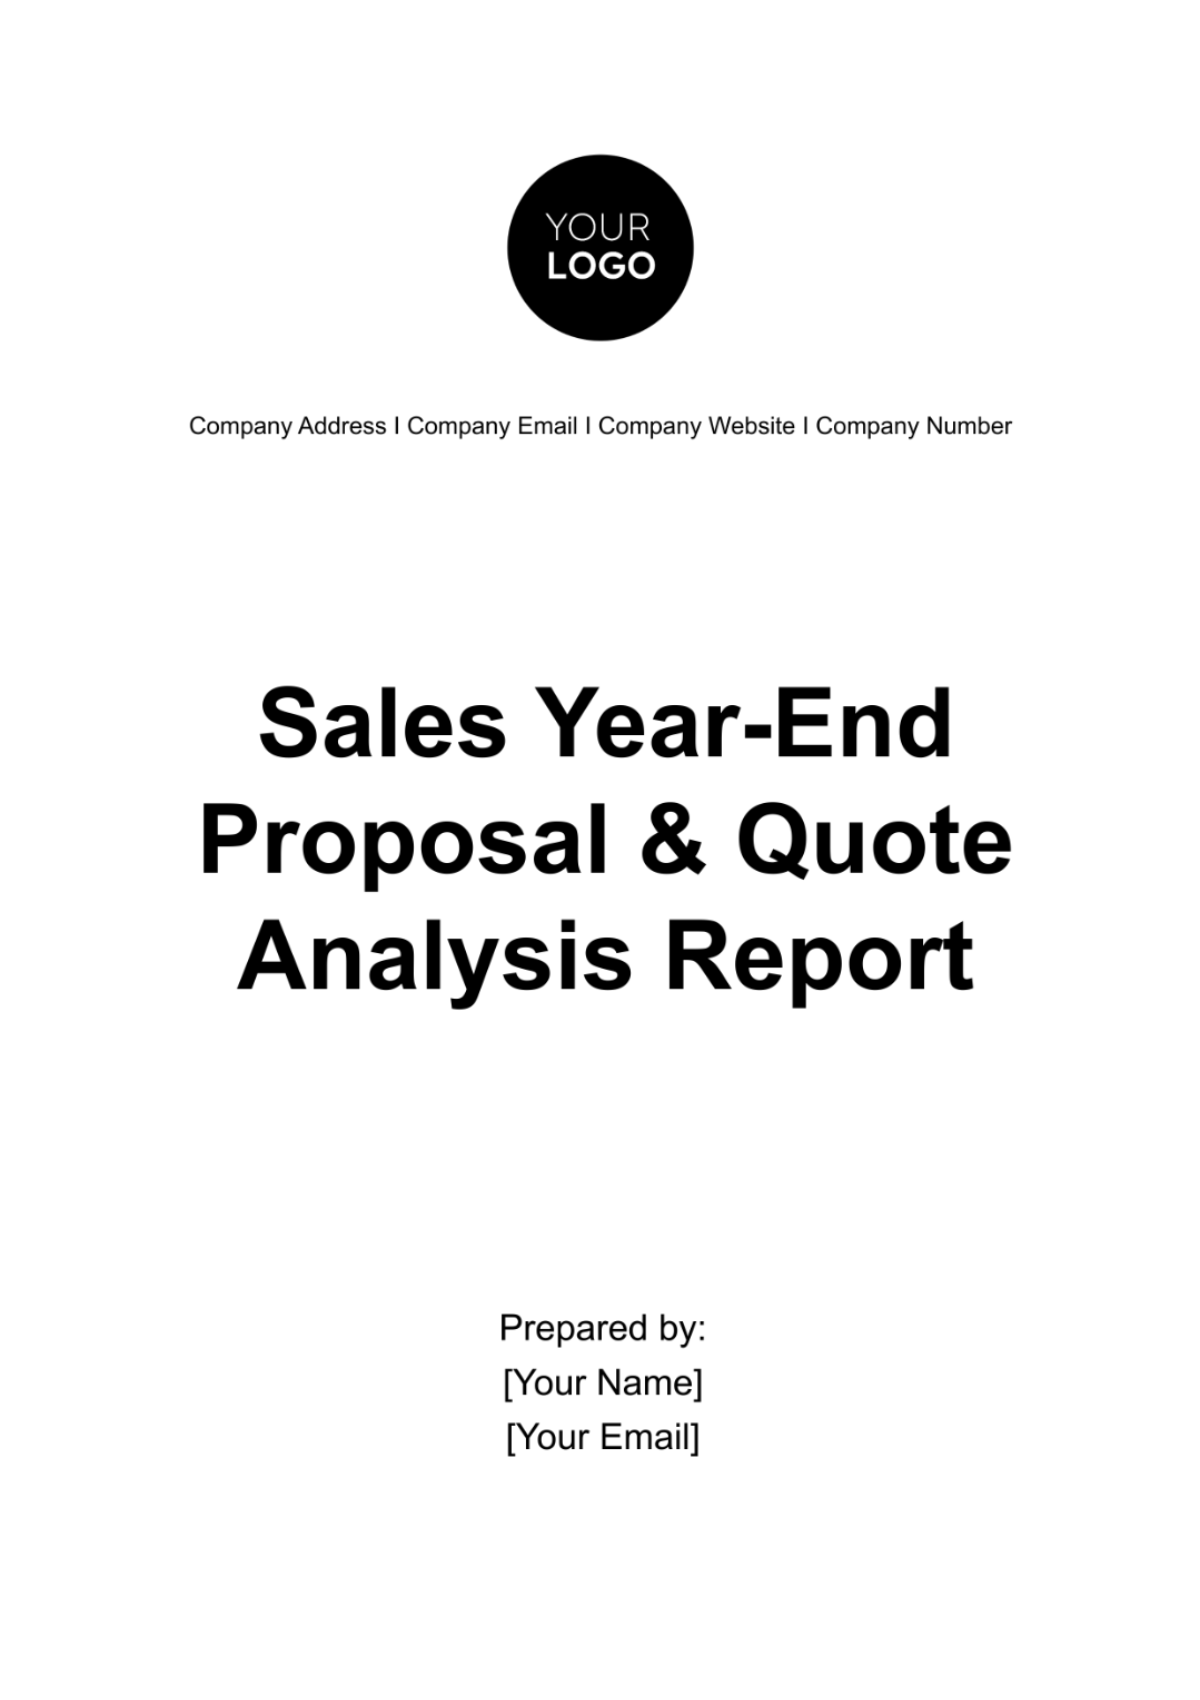 Free Sales Year-End Proposal & Quote Analysis Report Template